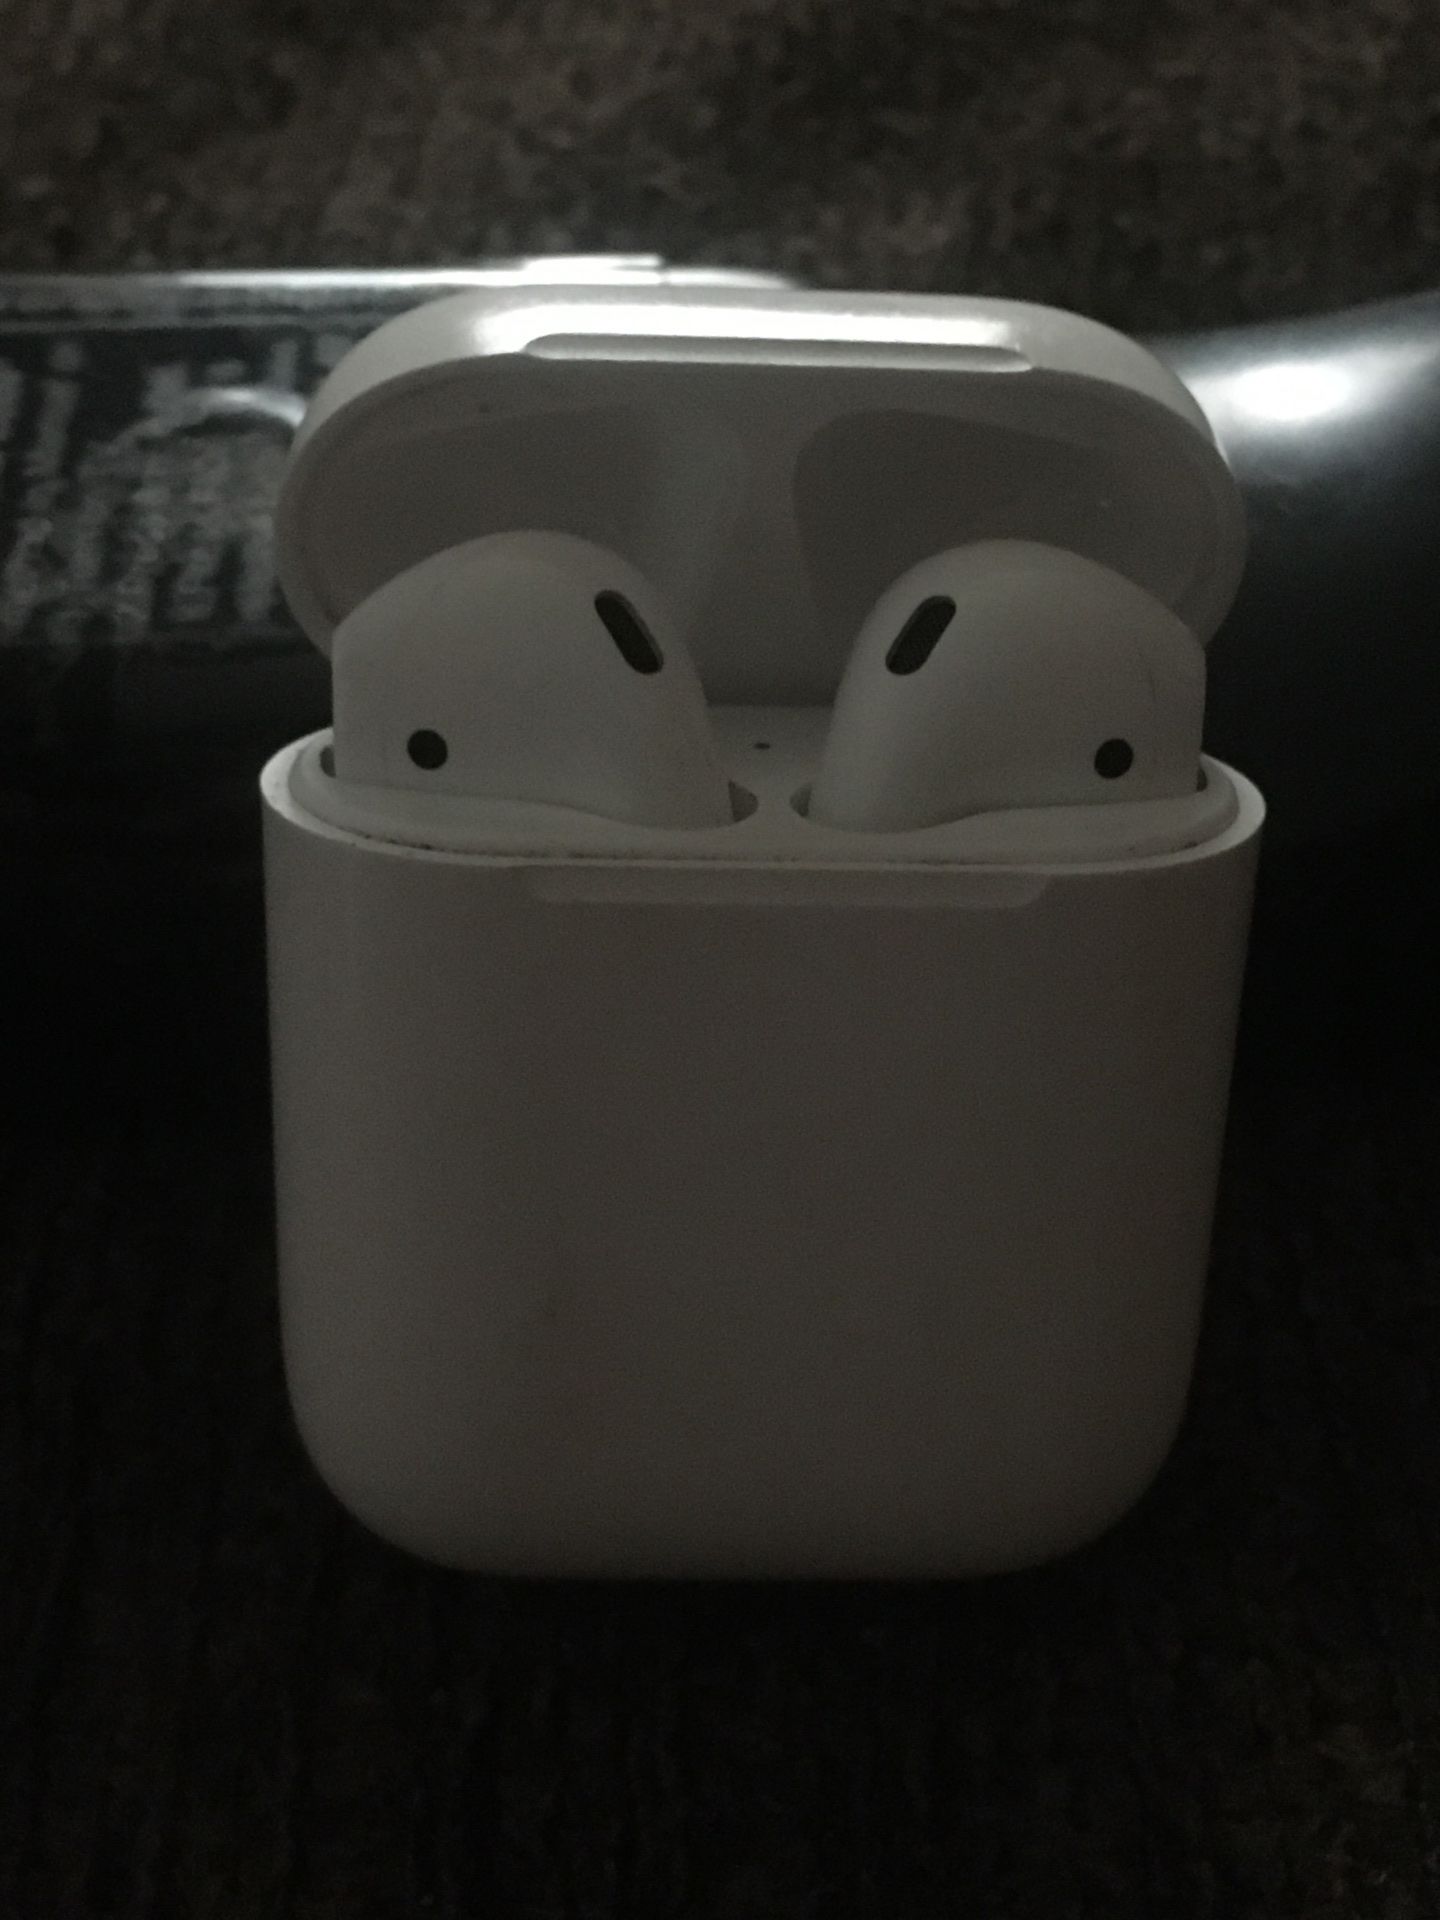 Brand new apple air pods